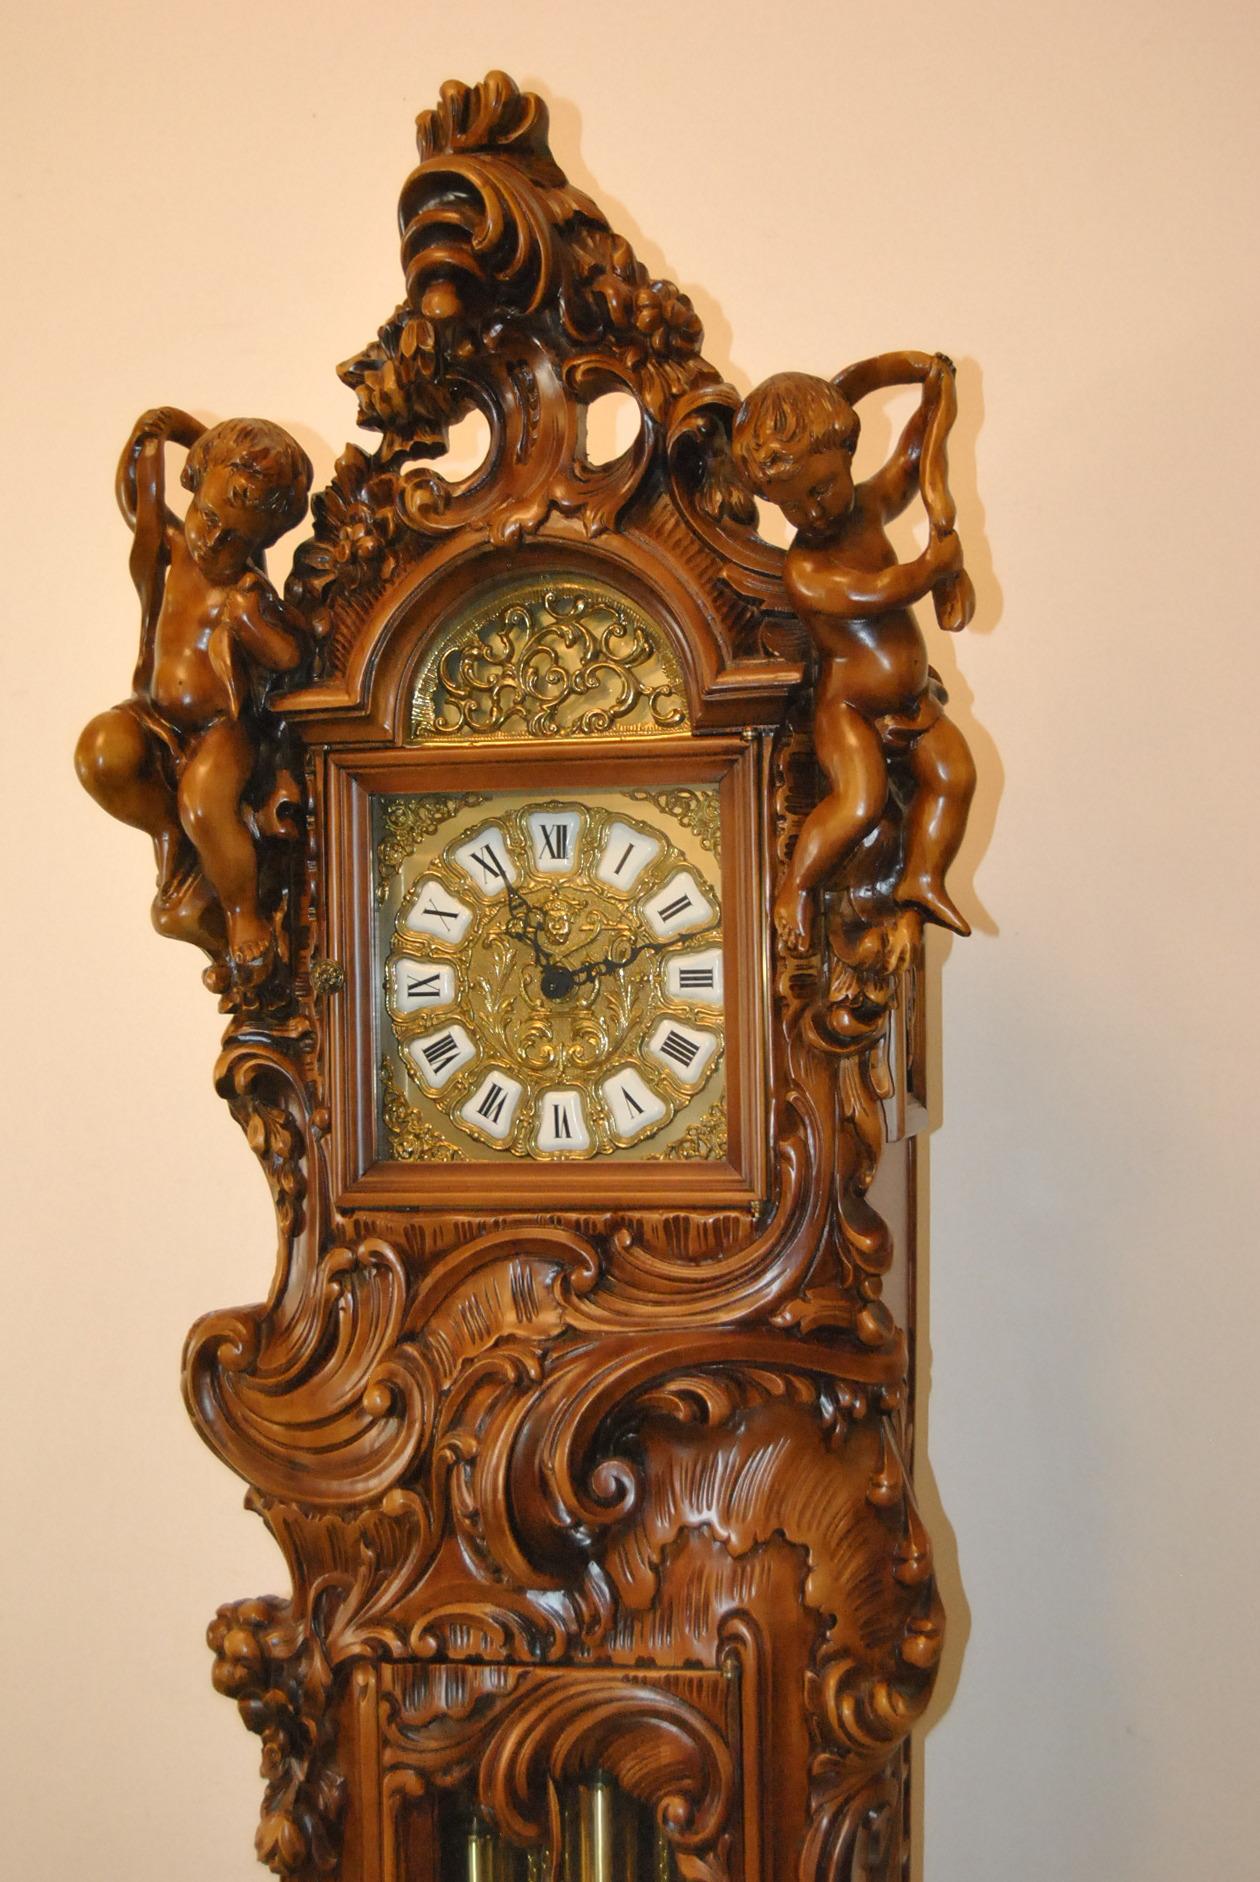 At Nouveau Italian Baroque walnut grandfather clock with caved cherubs. Brass dial has porcelain markers. Eight day Franz Hermle chain wound movement. Running condition. Chimes every quarter and on the hour.